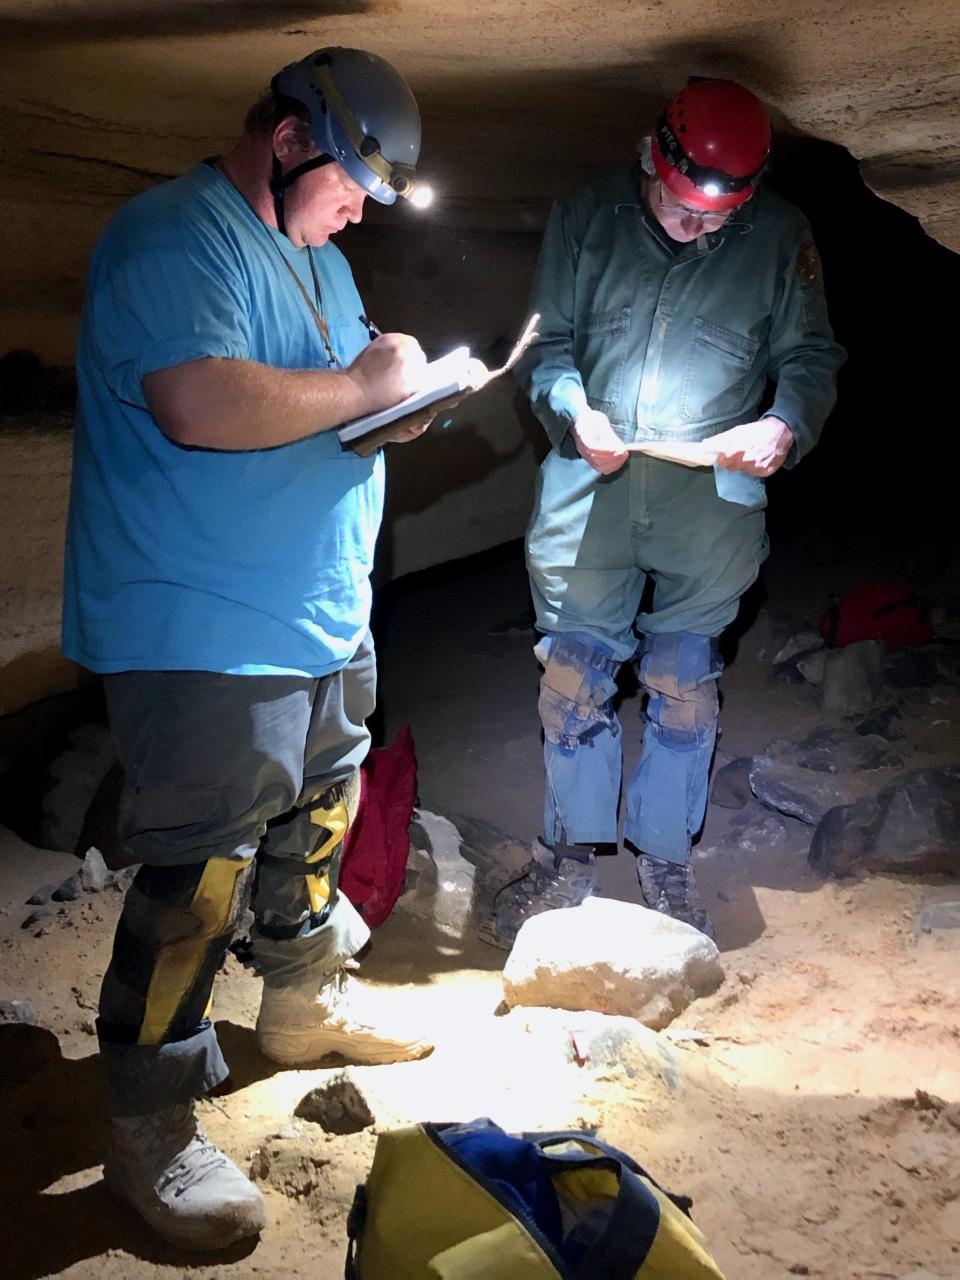 J.P. Hodnett (left) and Rick Toomey (right) on a Fossil Research Trip at Mammoth Cave